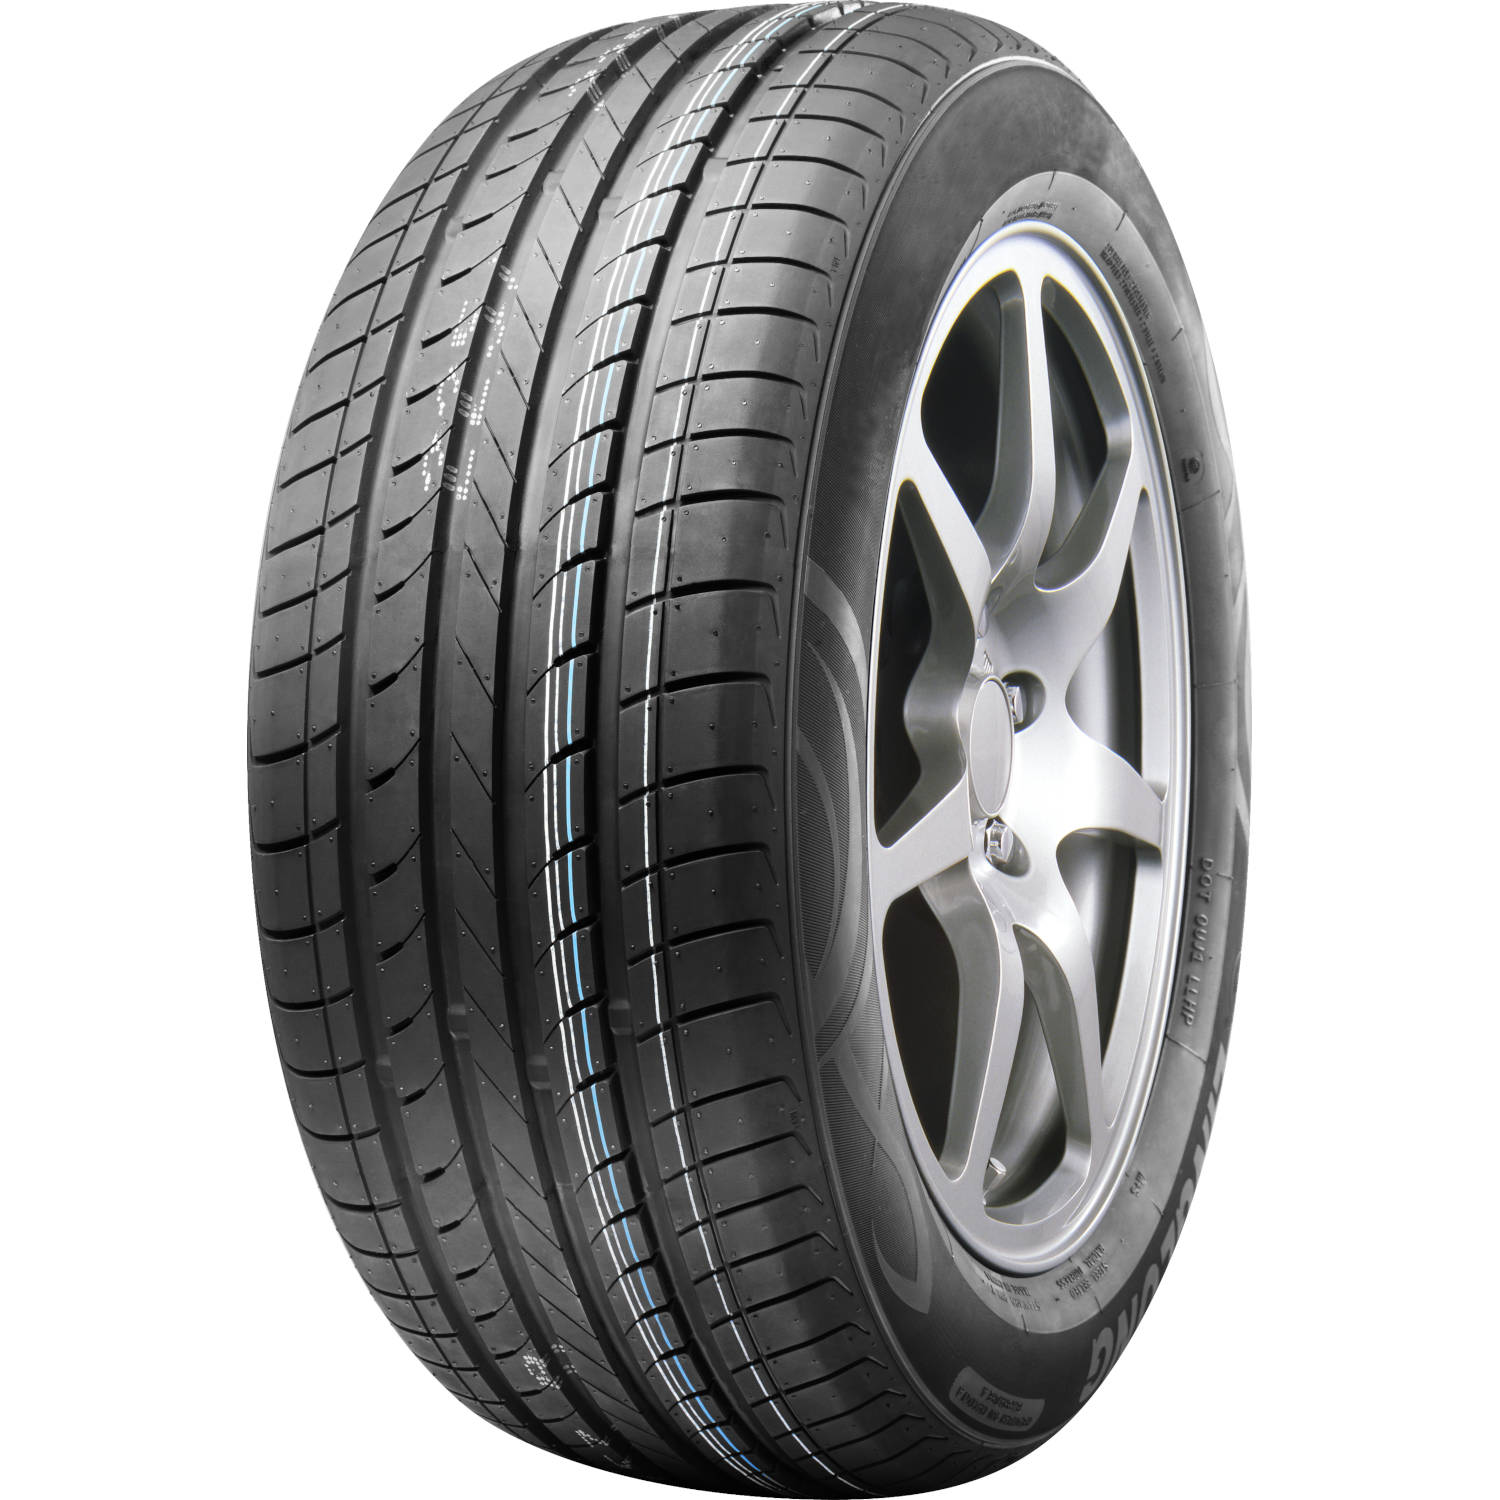 ROAD ONE CAVALRY HP 215/65R16 (27X8.5R 16) Tires